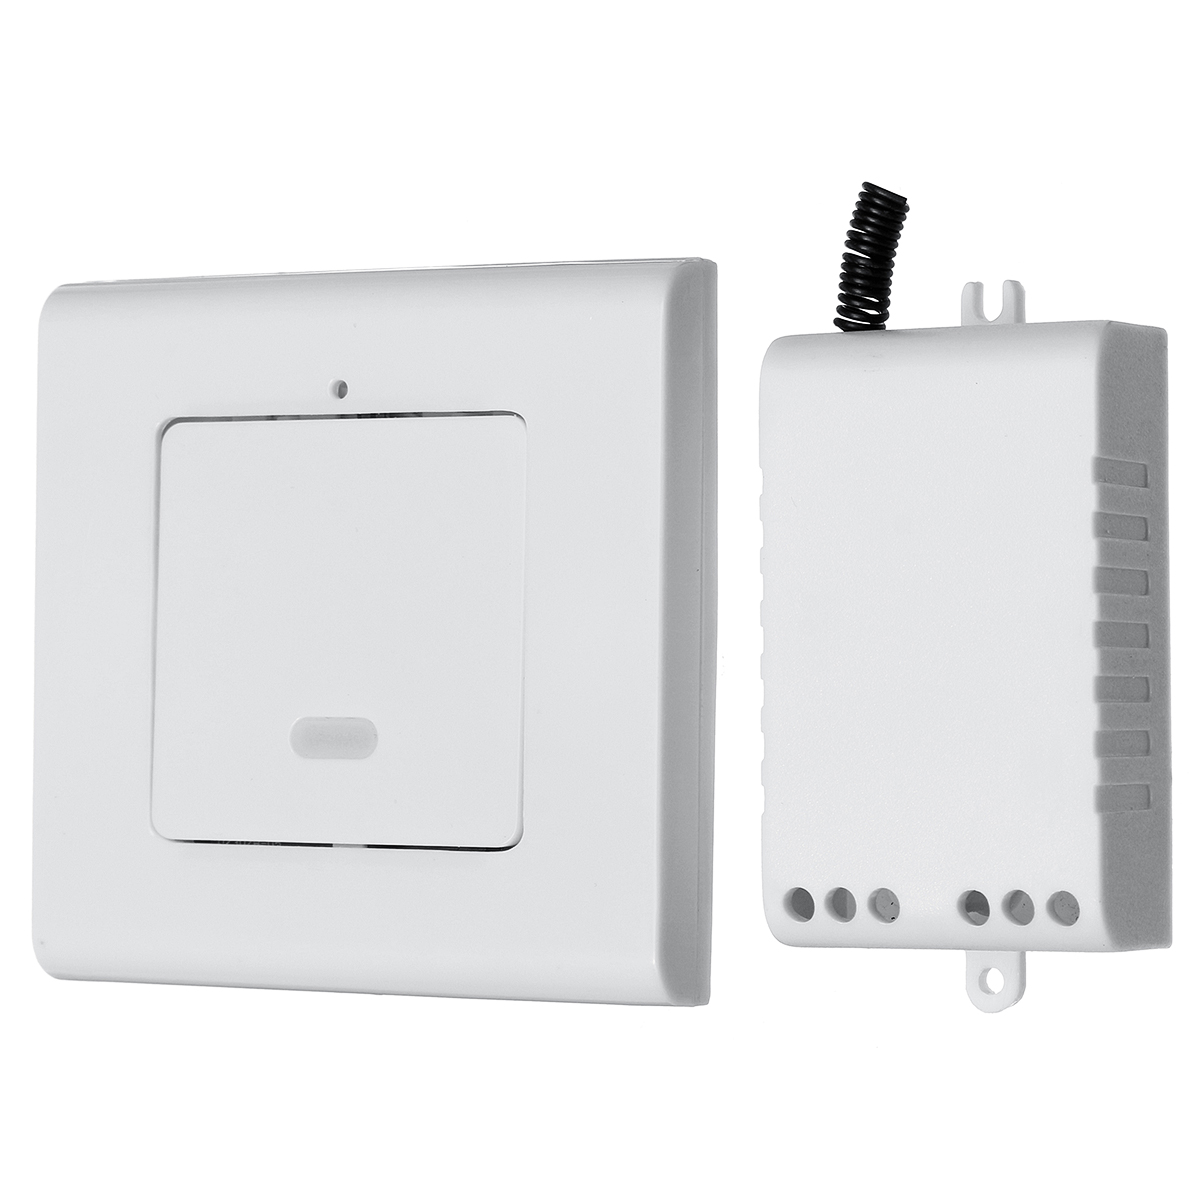 1-Way-Wall-Lamp-Wireless-Remote-Control-ONOFF-Light-Switch---Receiver-AC220V-1296321-3